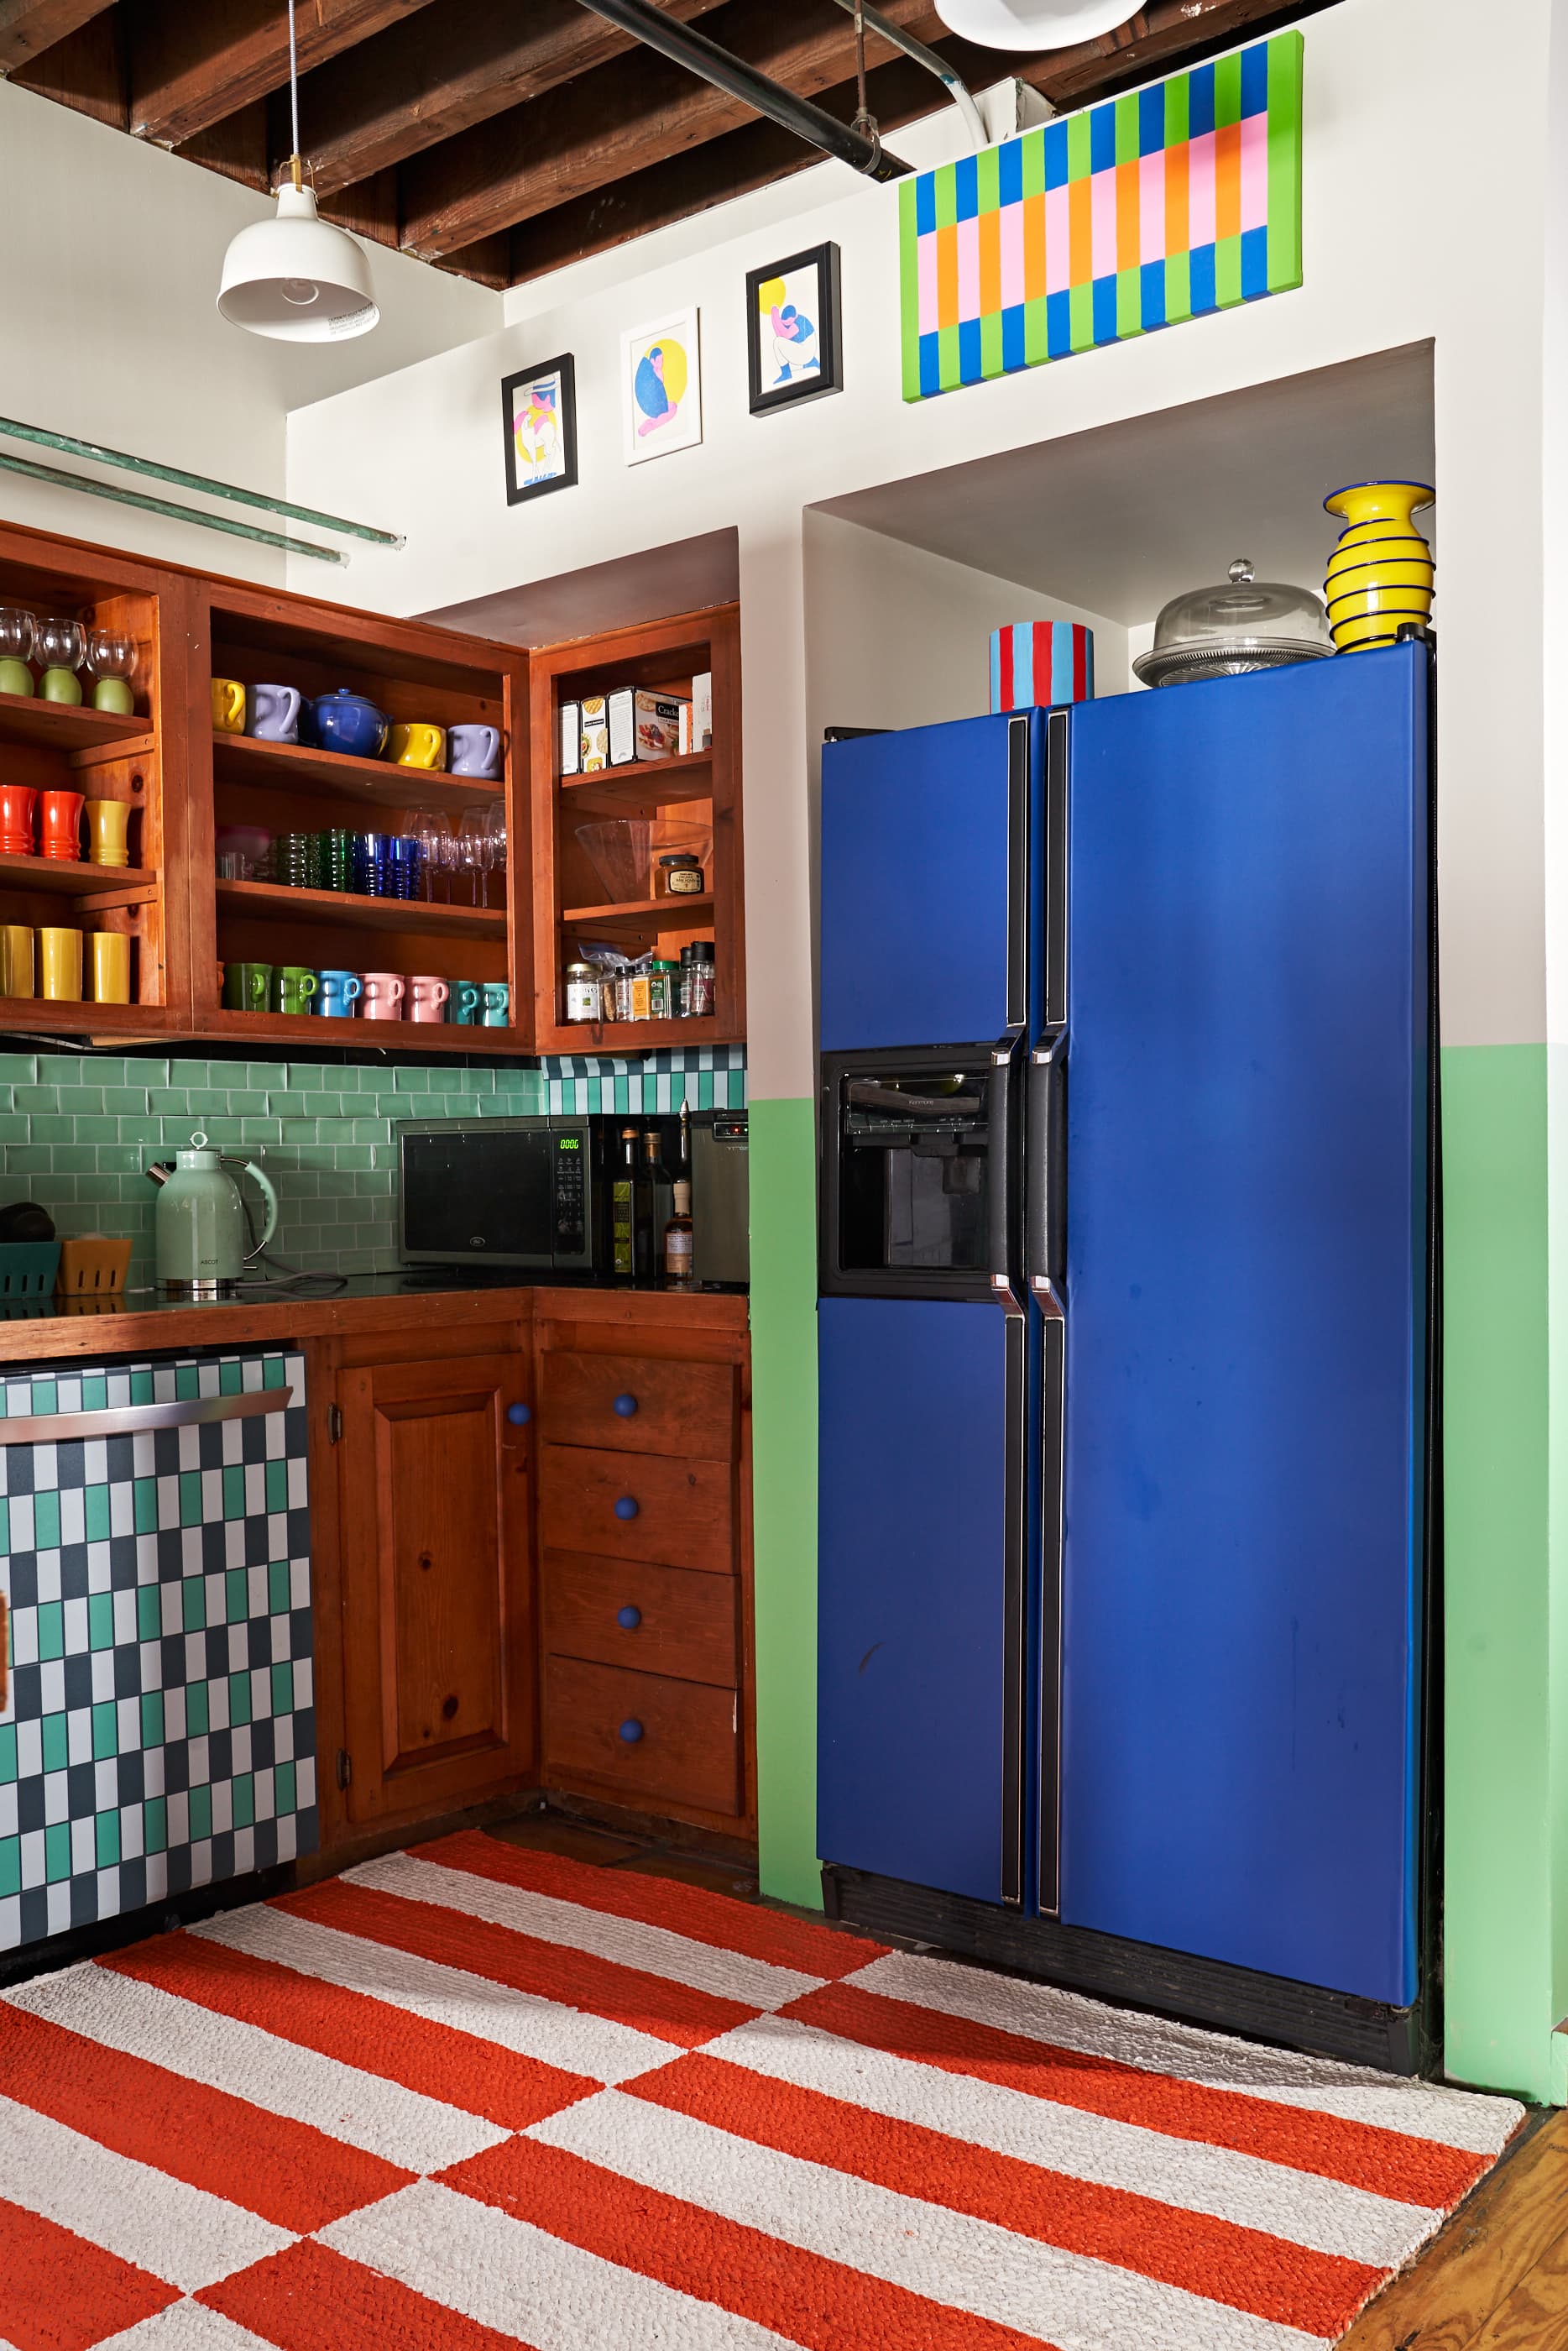 Colorful Kitchen Ideas – Forbes Home